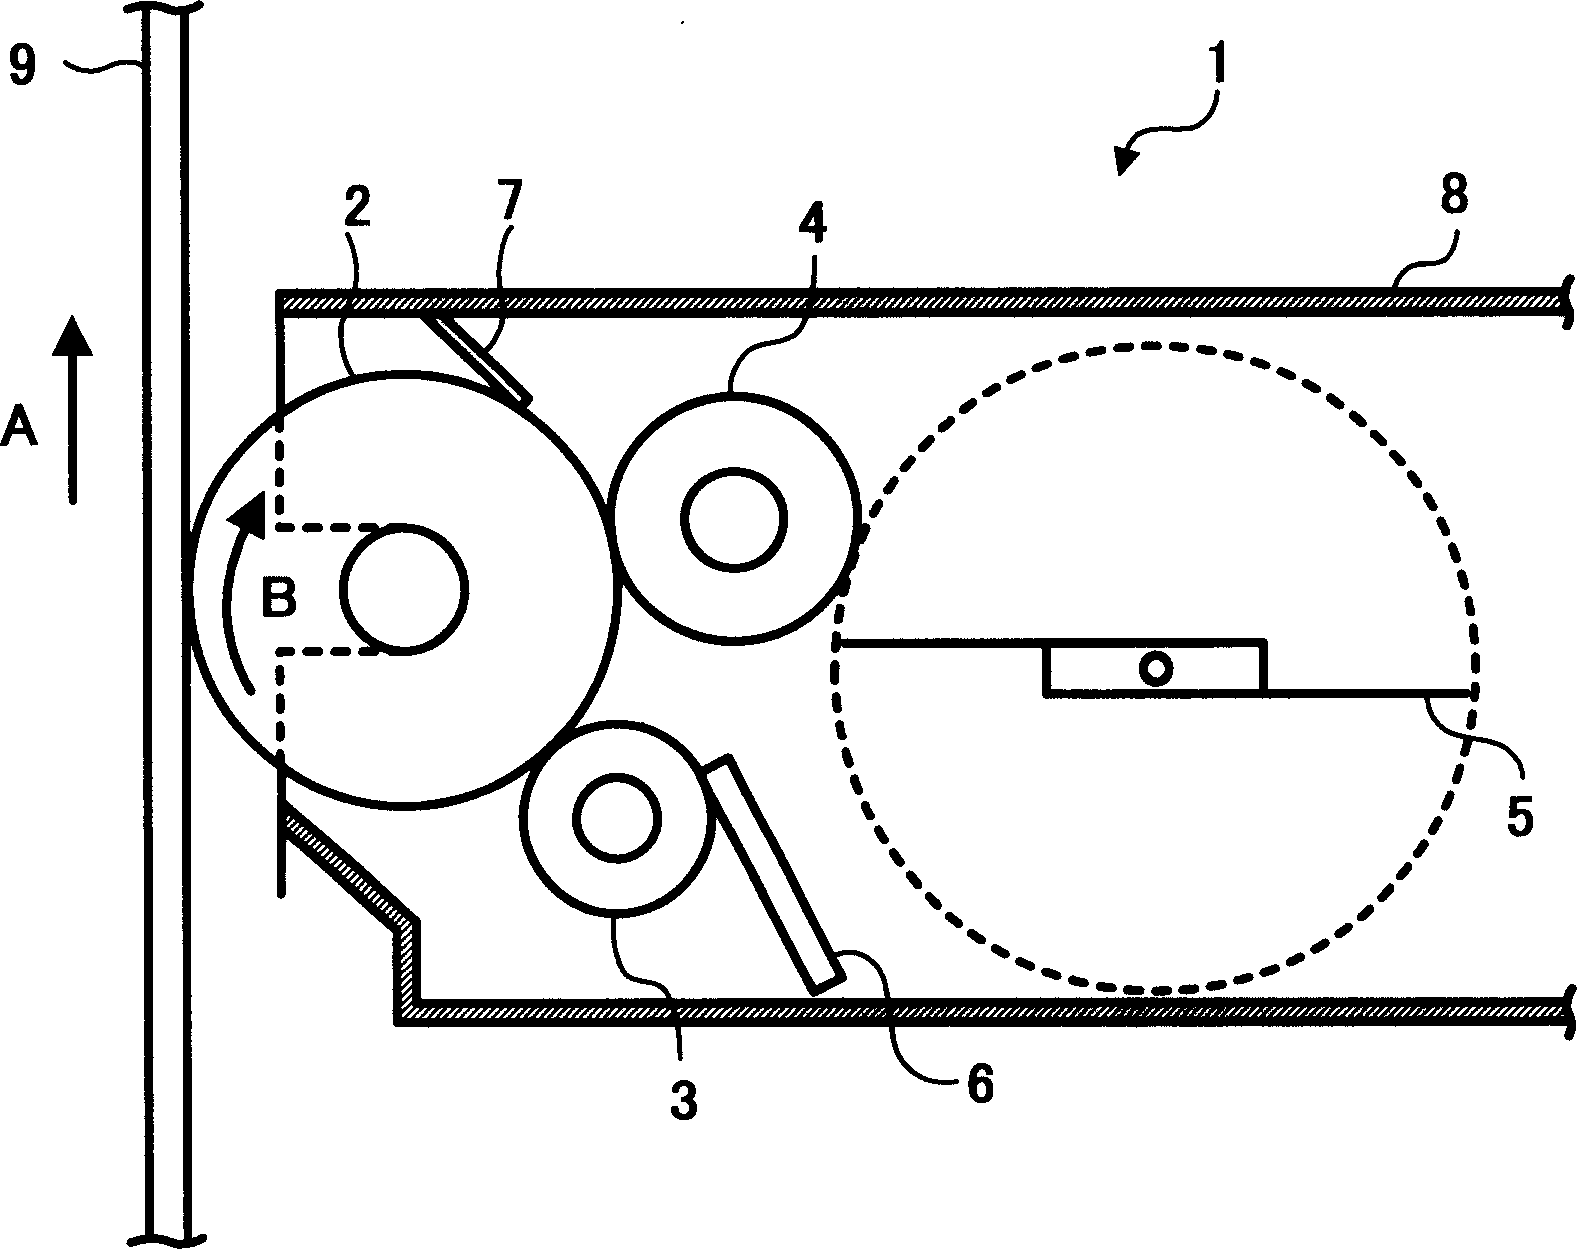 Developing starting method, developing device and processing card box